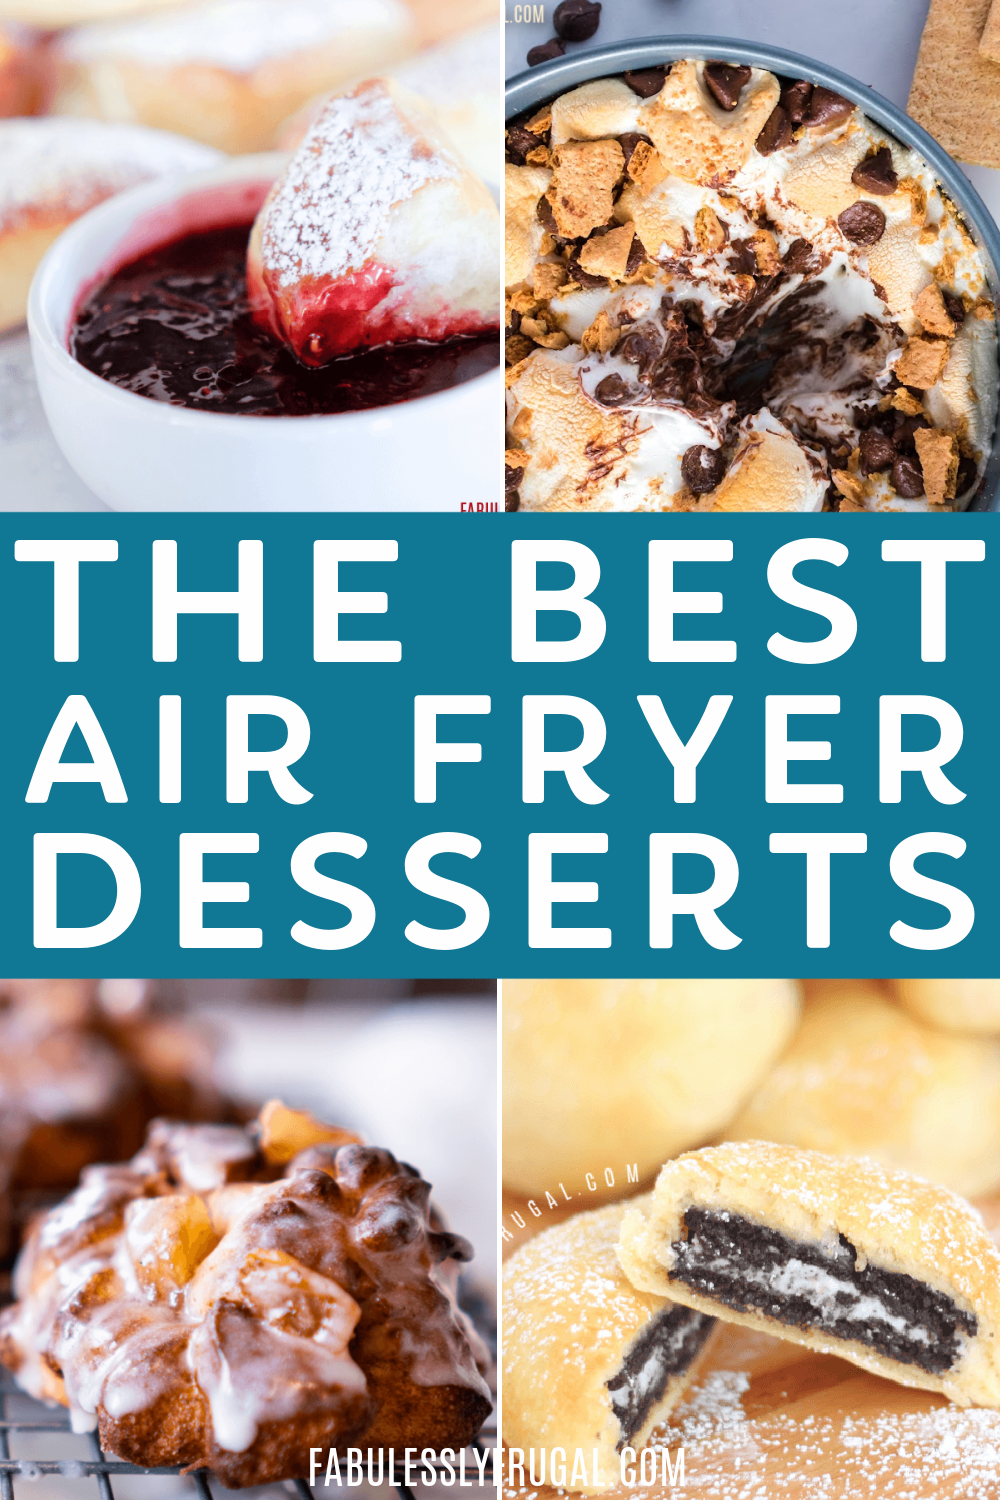 https://fabulesslyfrugal.com/wp-content/uploads/2022/12/The-10-Best-Air-Fryer-Recipes-Ever-3.png